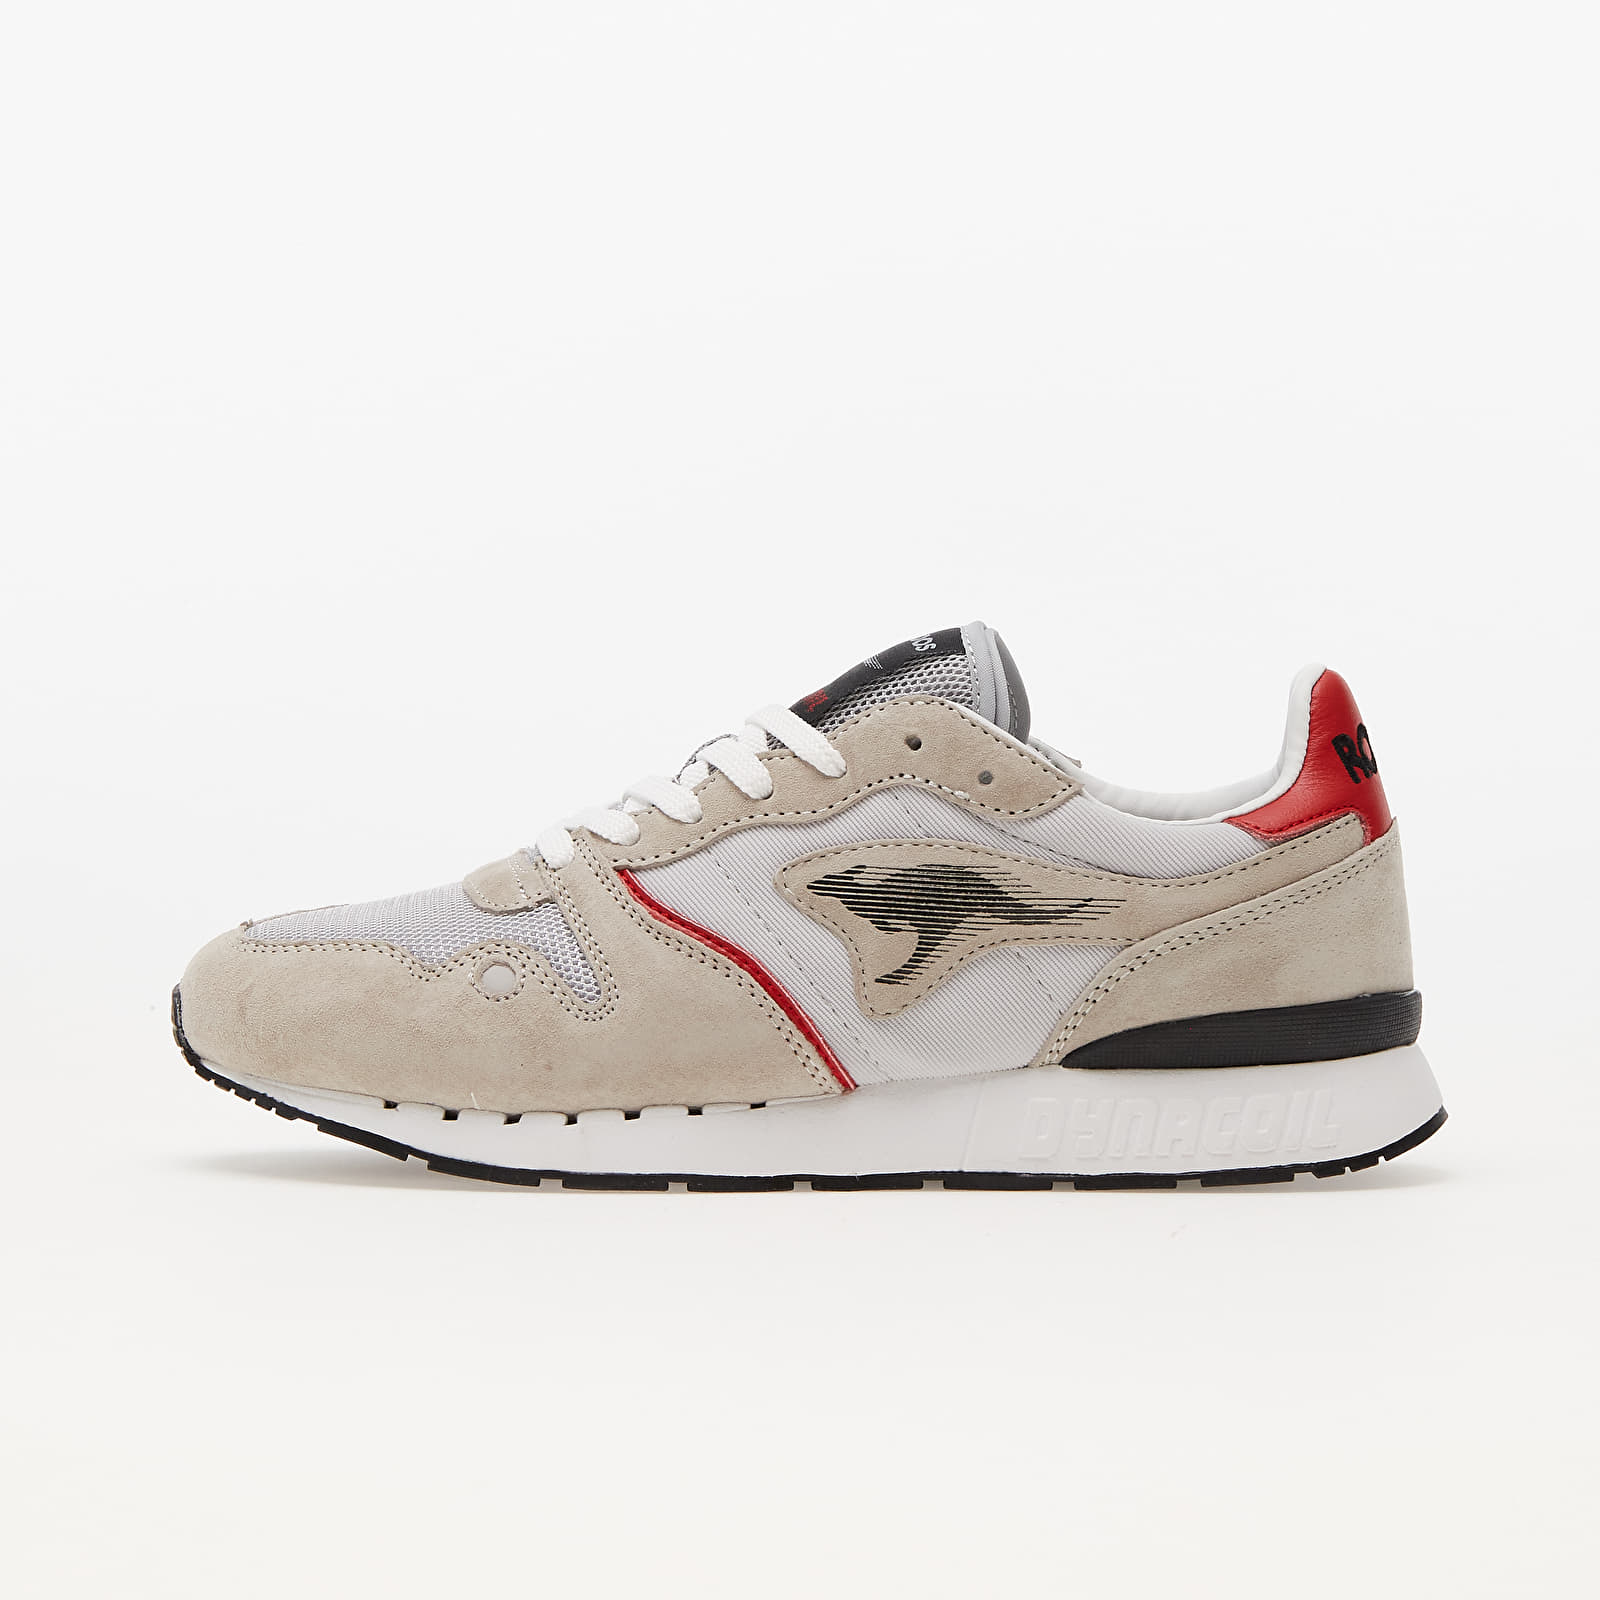 Chaussures et baskets homme KangaROOS COIL RX Cream/ K Red